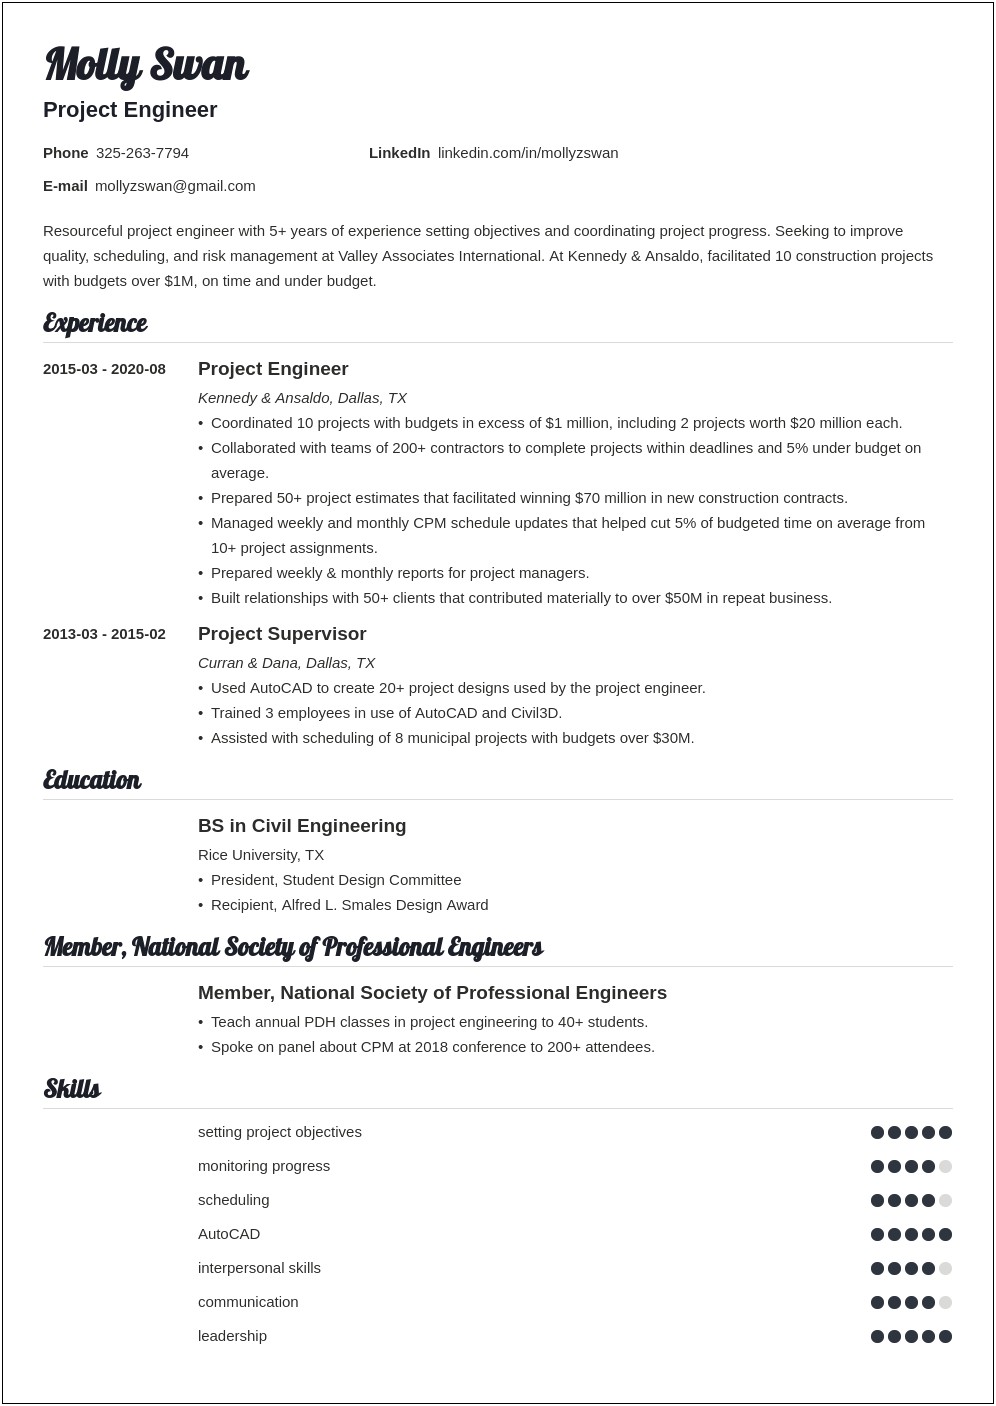 Best Resume Atributes For Project Engineer